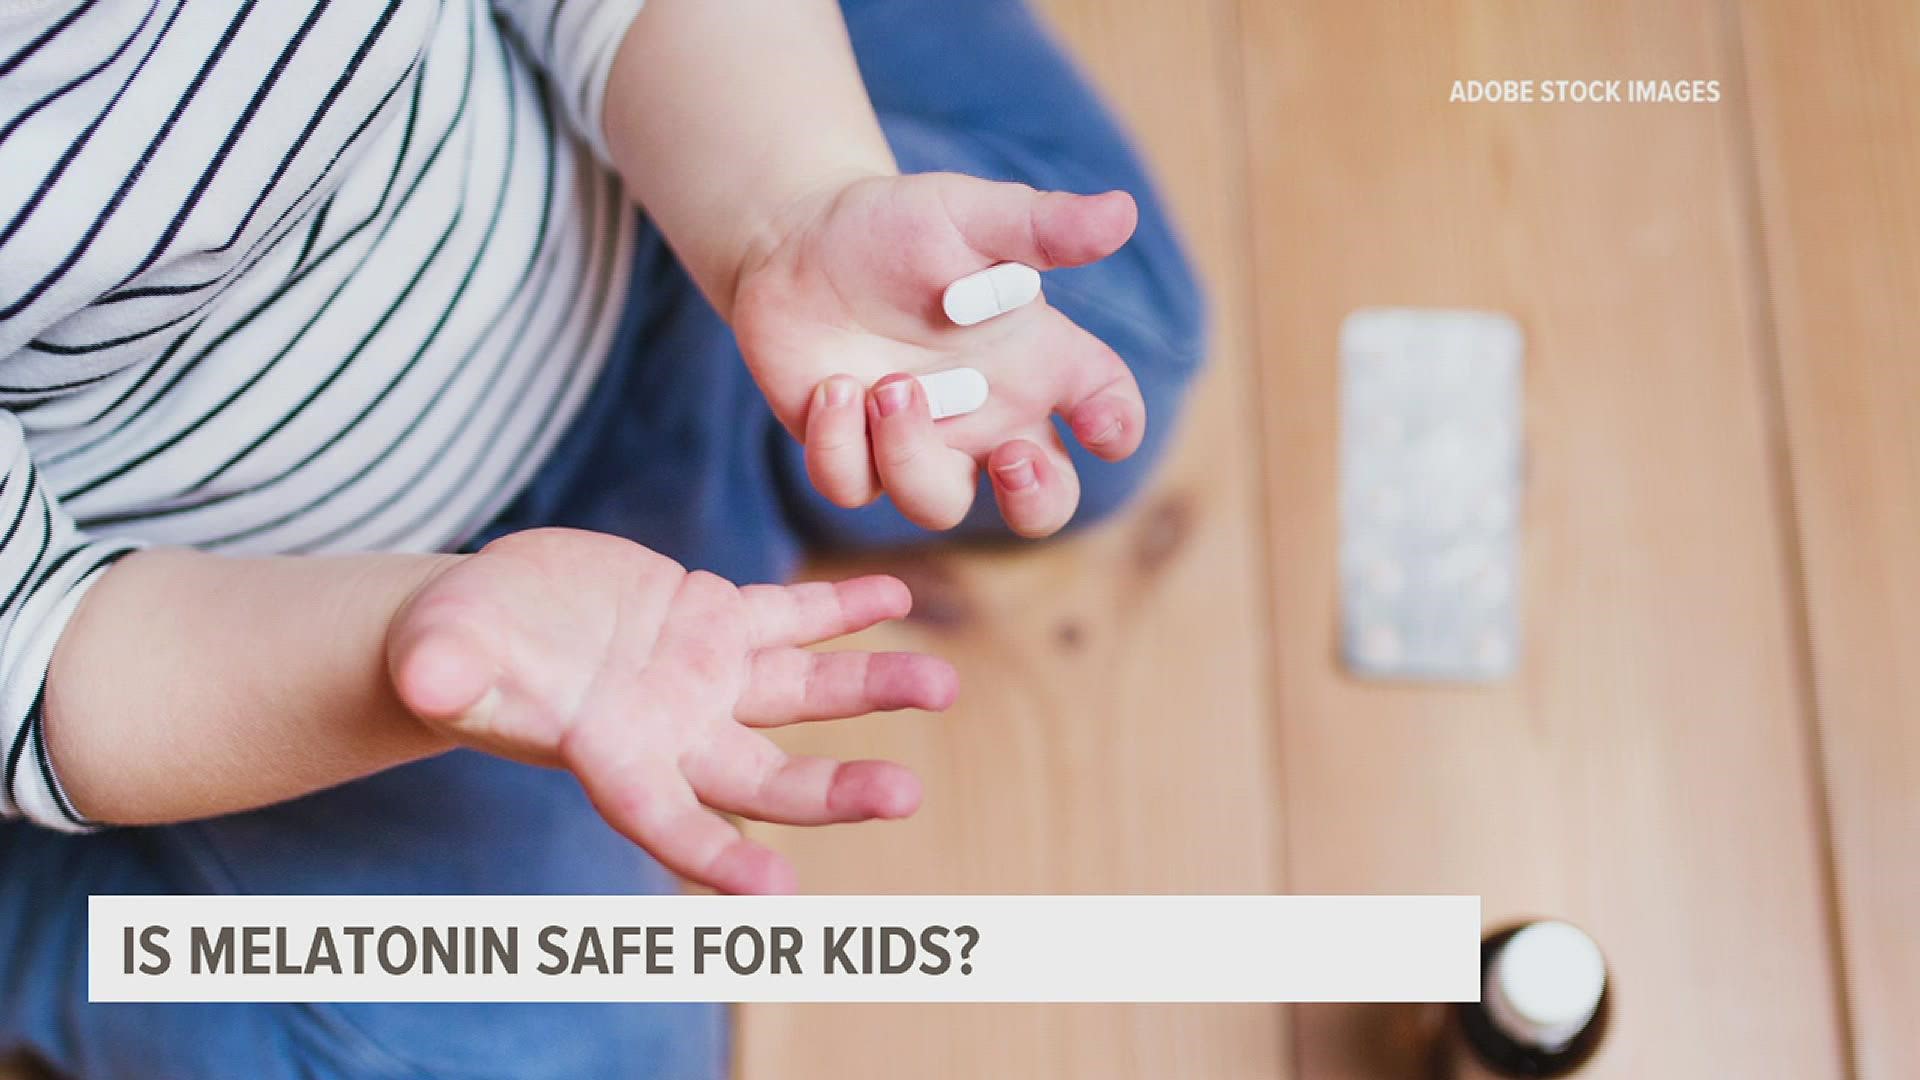 A new study shows an alarming increase in melatonin poisoning in children since 2012.